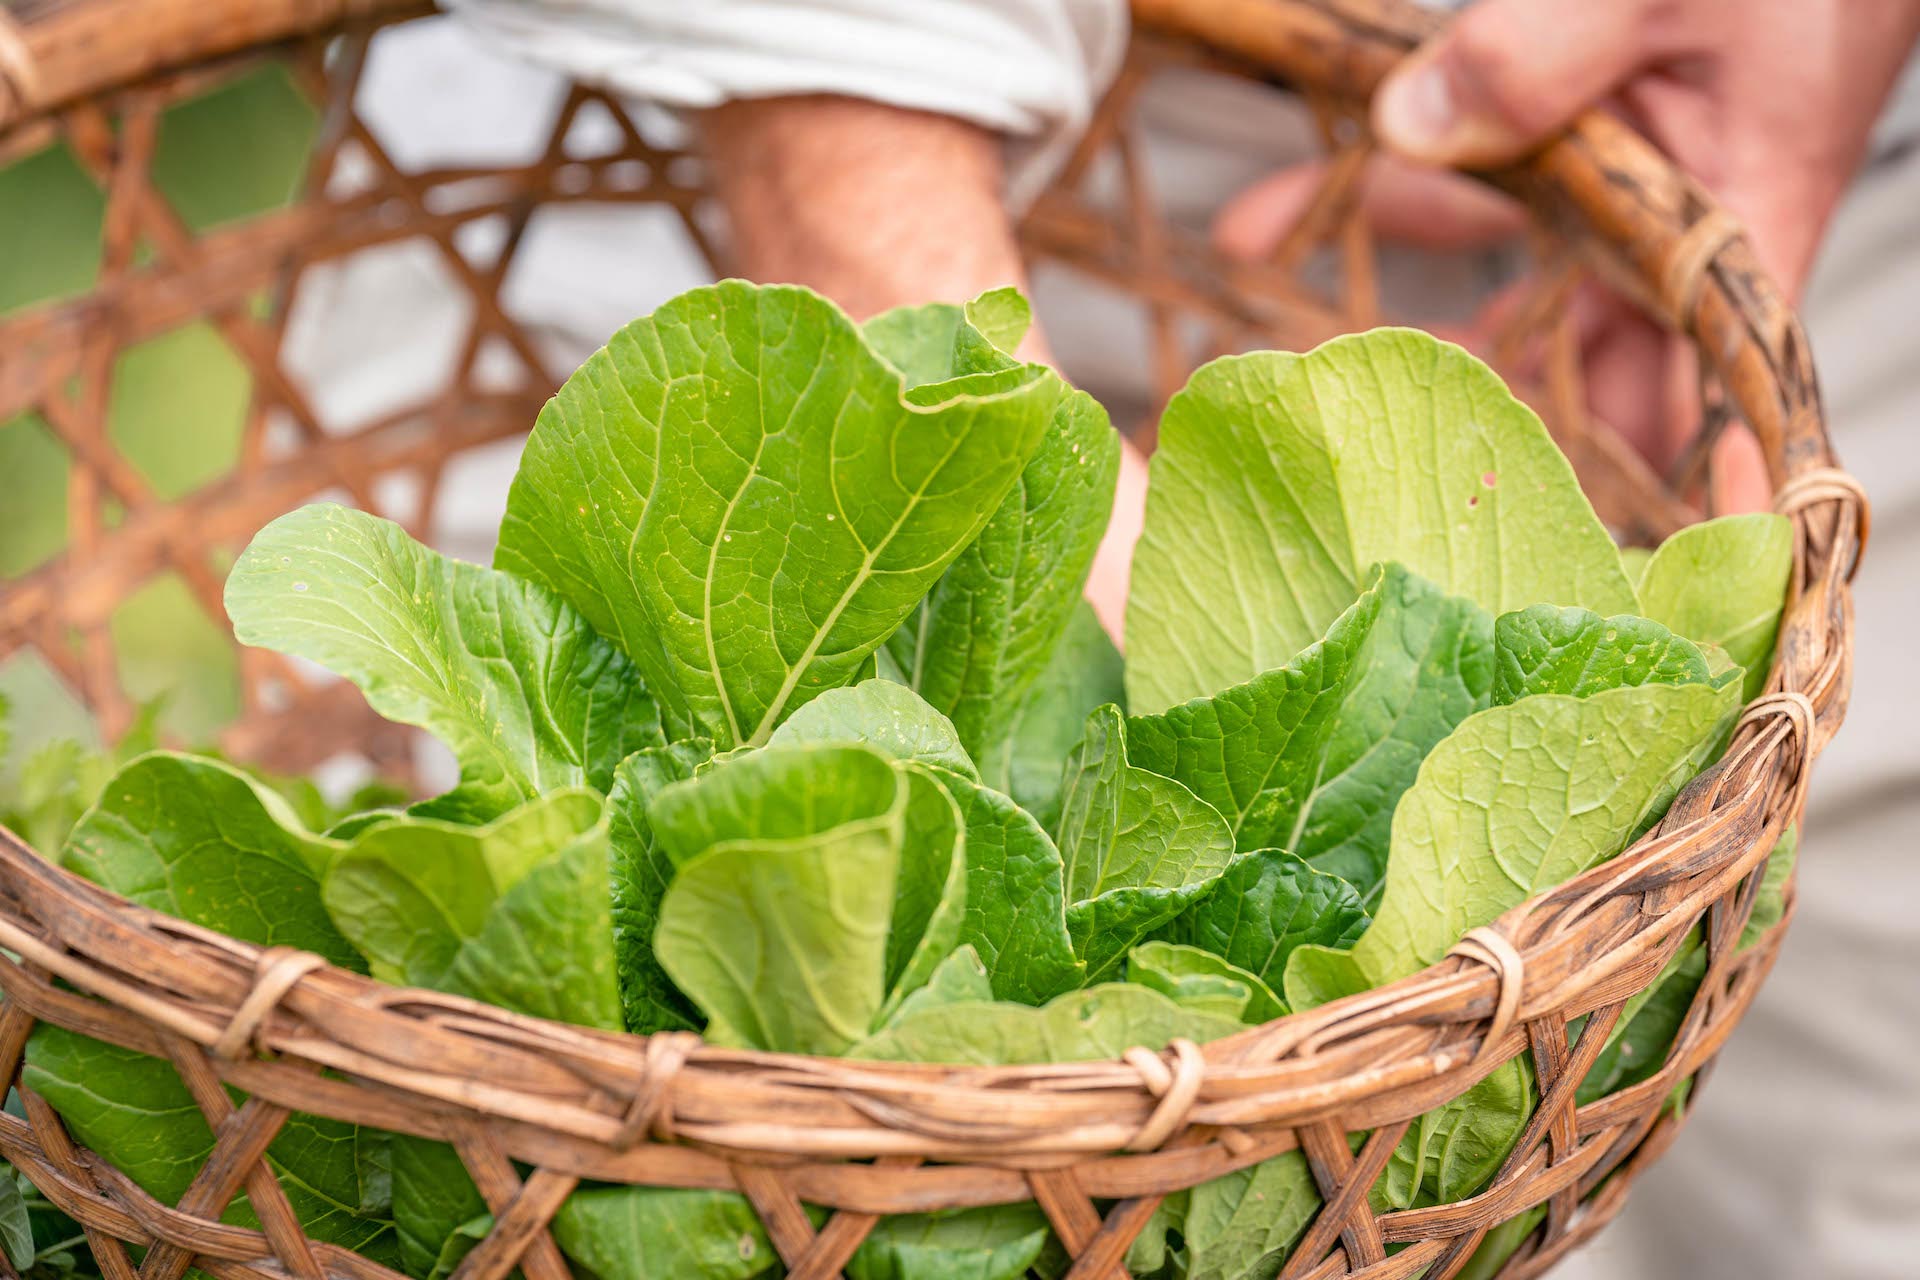 A man is holding a basket full of lettuce on a farm.